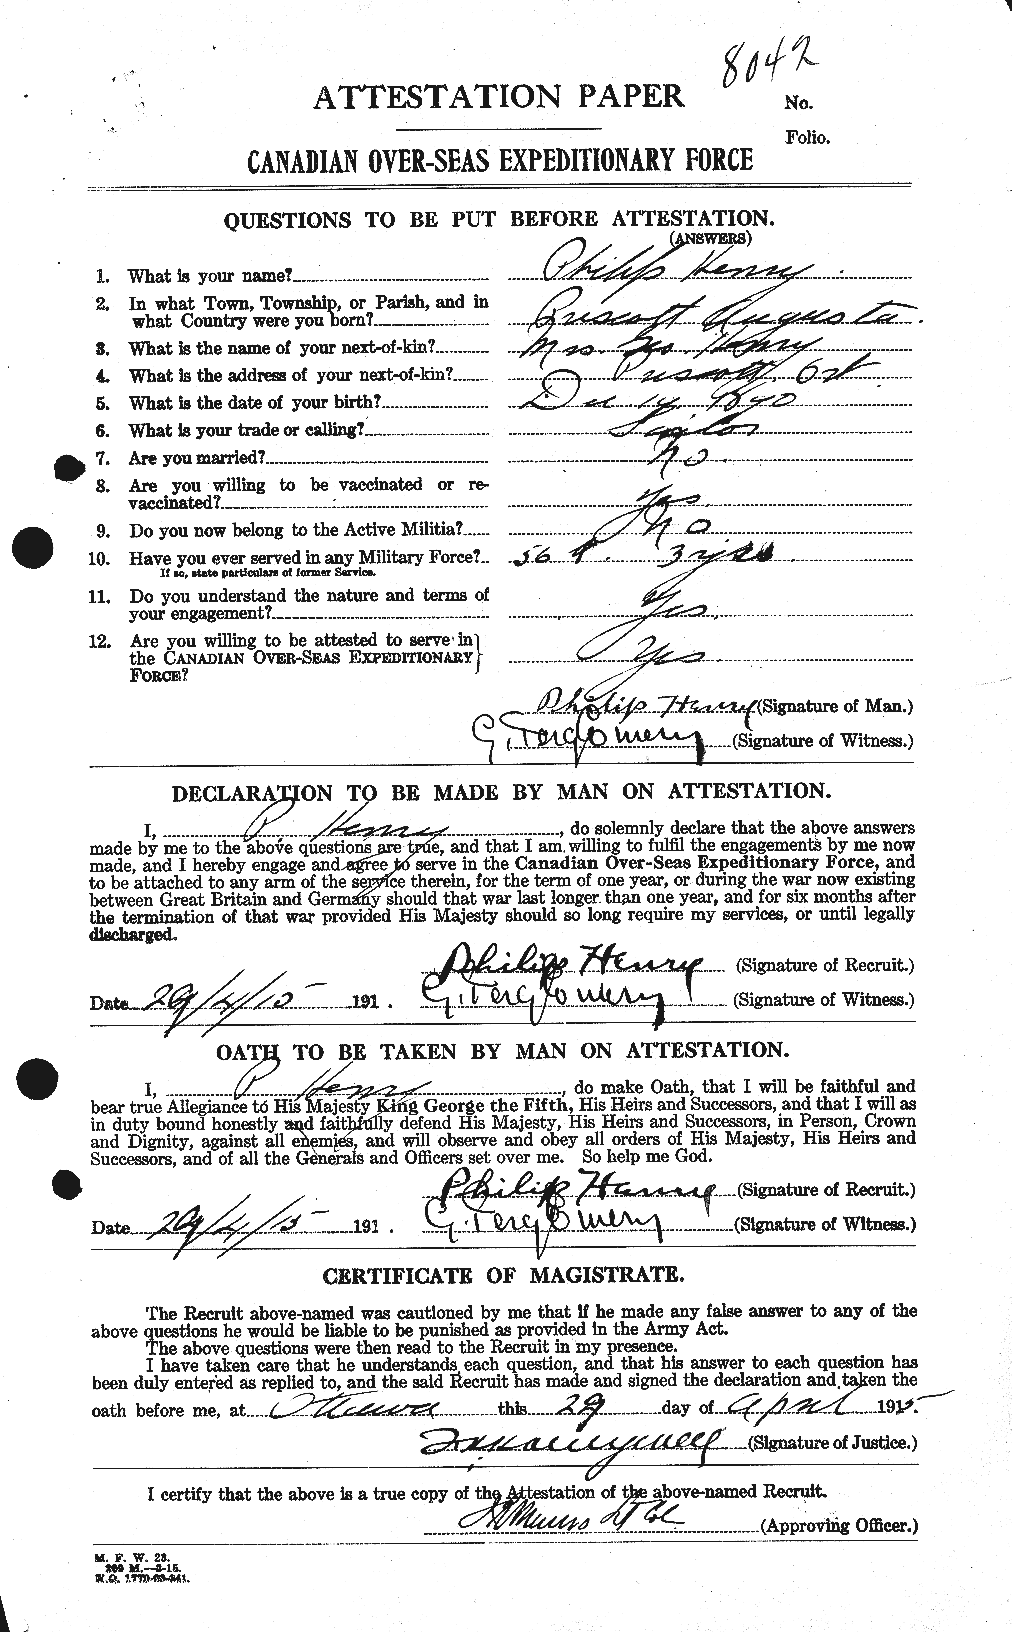 Personnel Records of the First World War - CEF 387691a